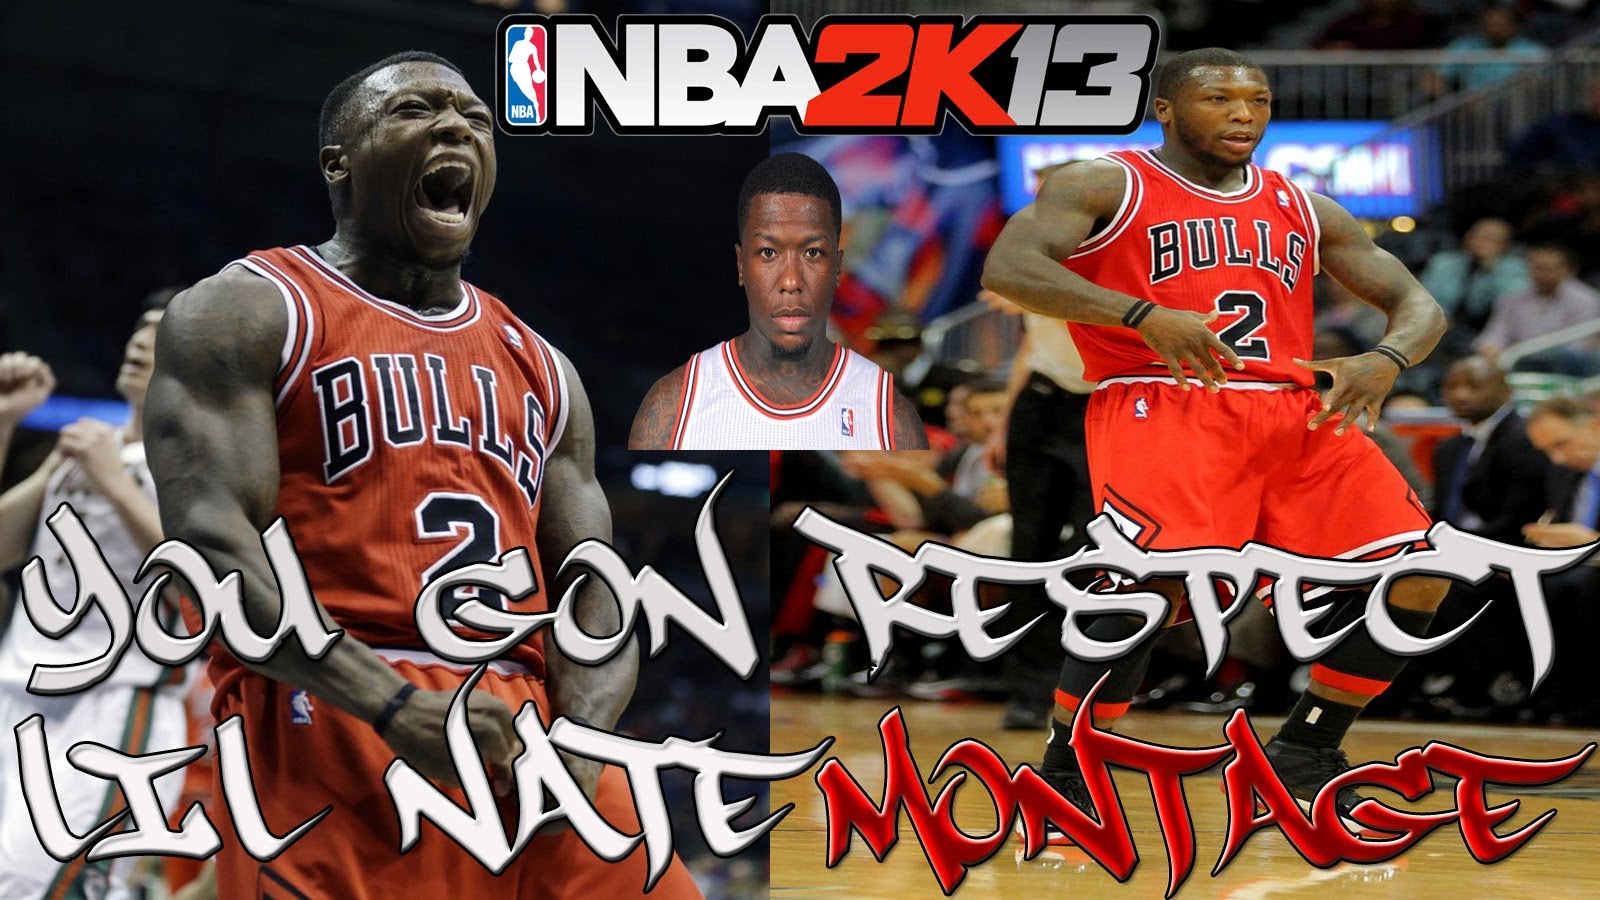 Nate Robinson HD Photo Wallpapers 2797 - Amazing Wallpaperz